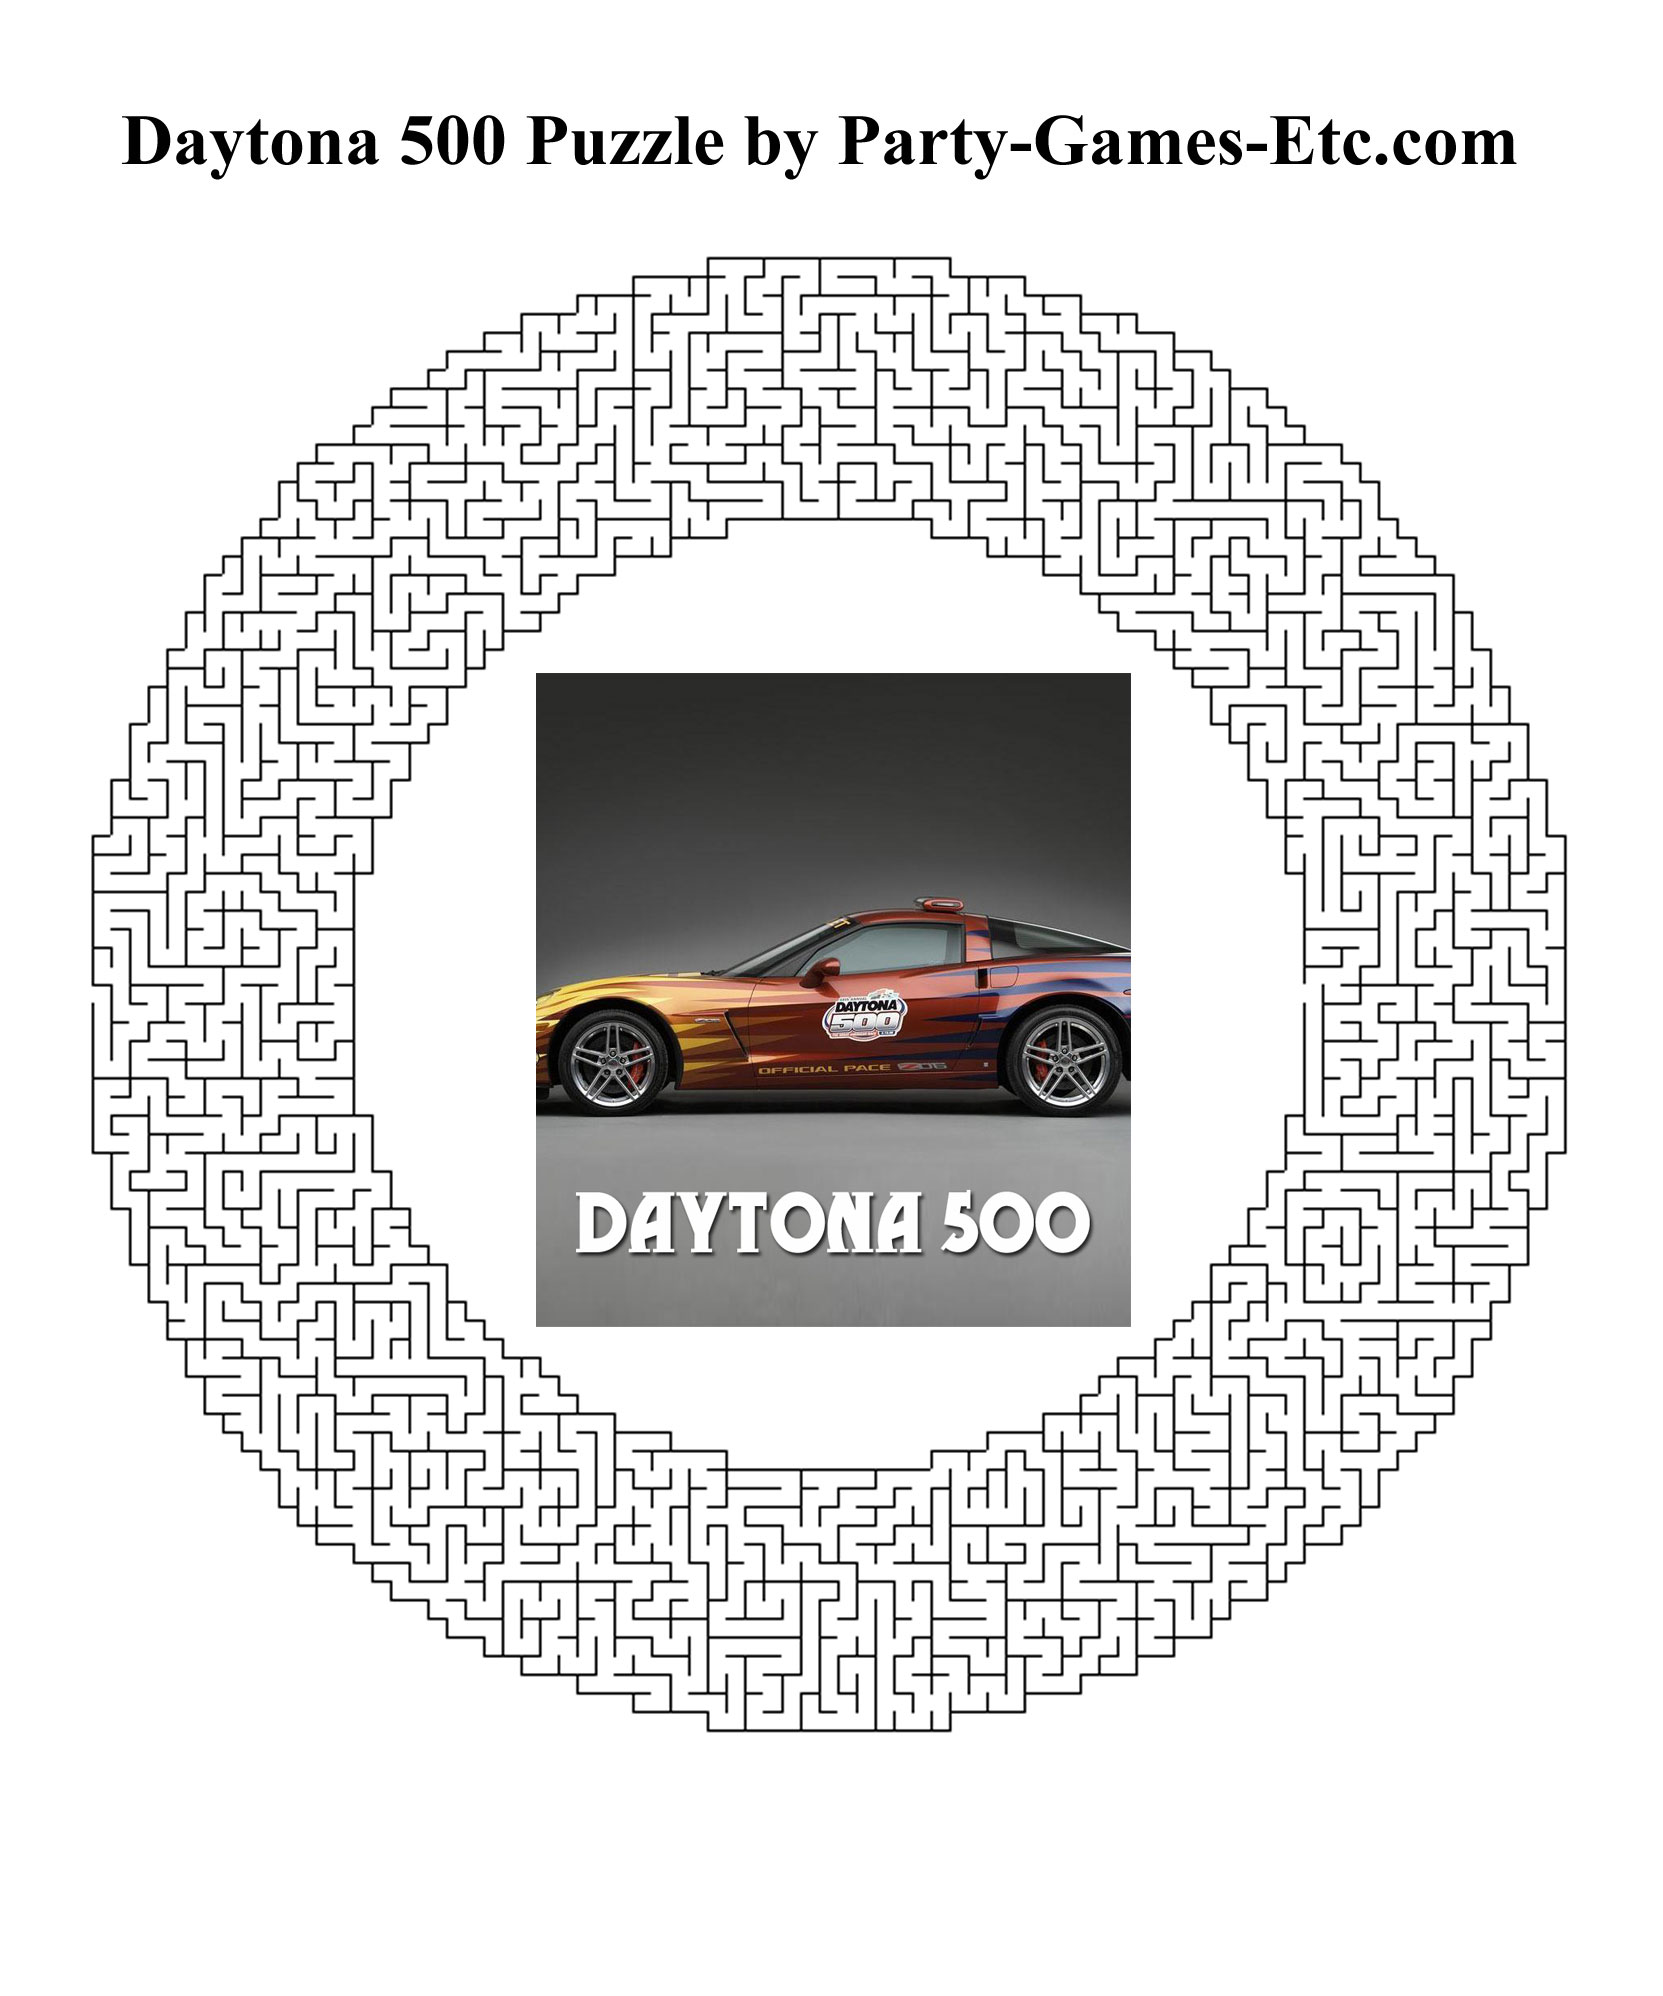 Free Printable Daytona 500 Party Game and Pen and Paper Activity